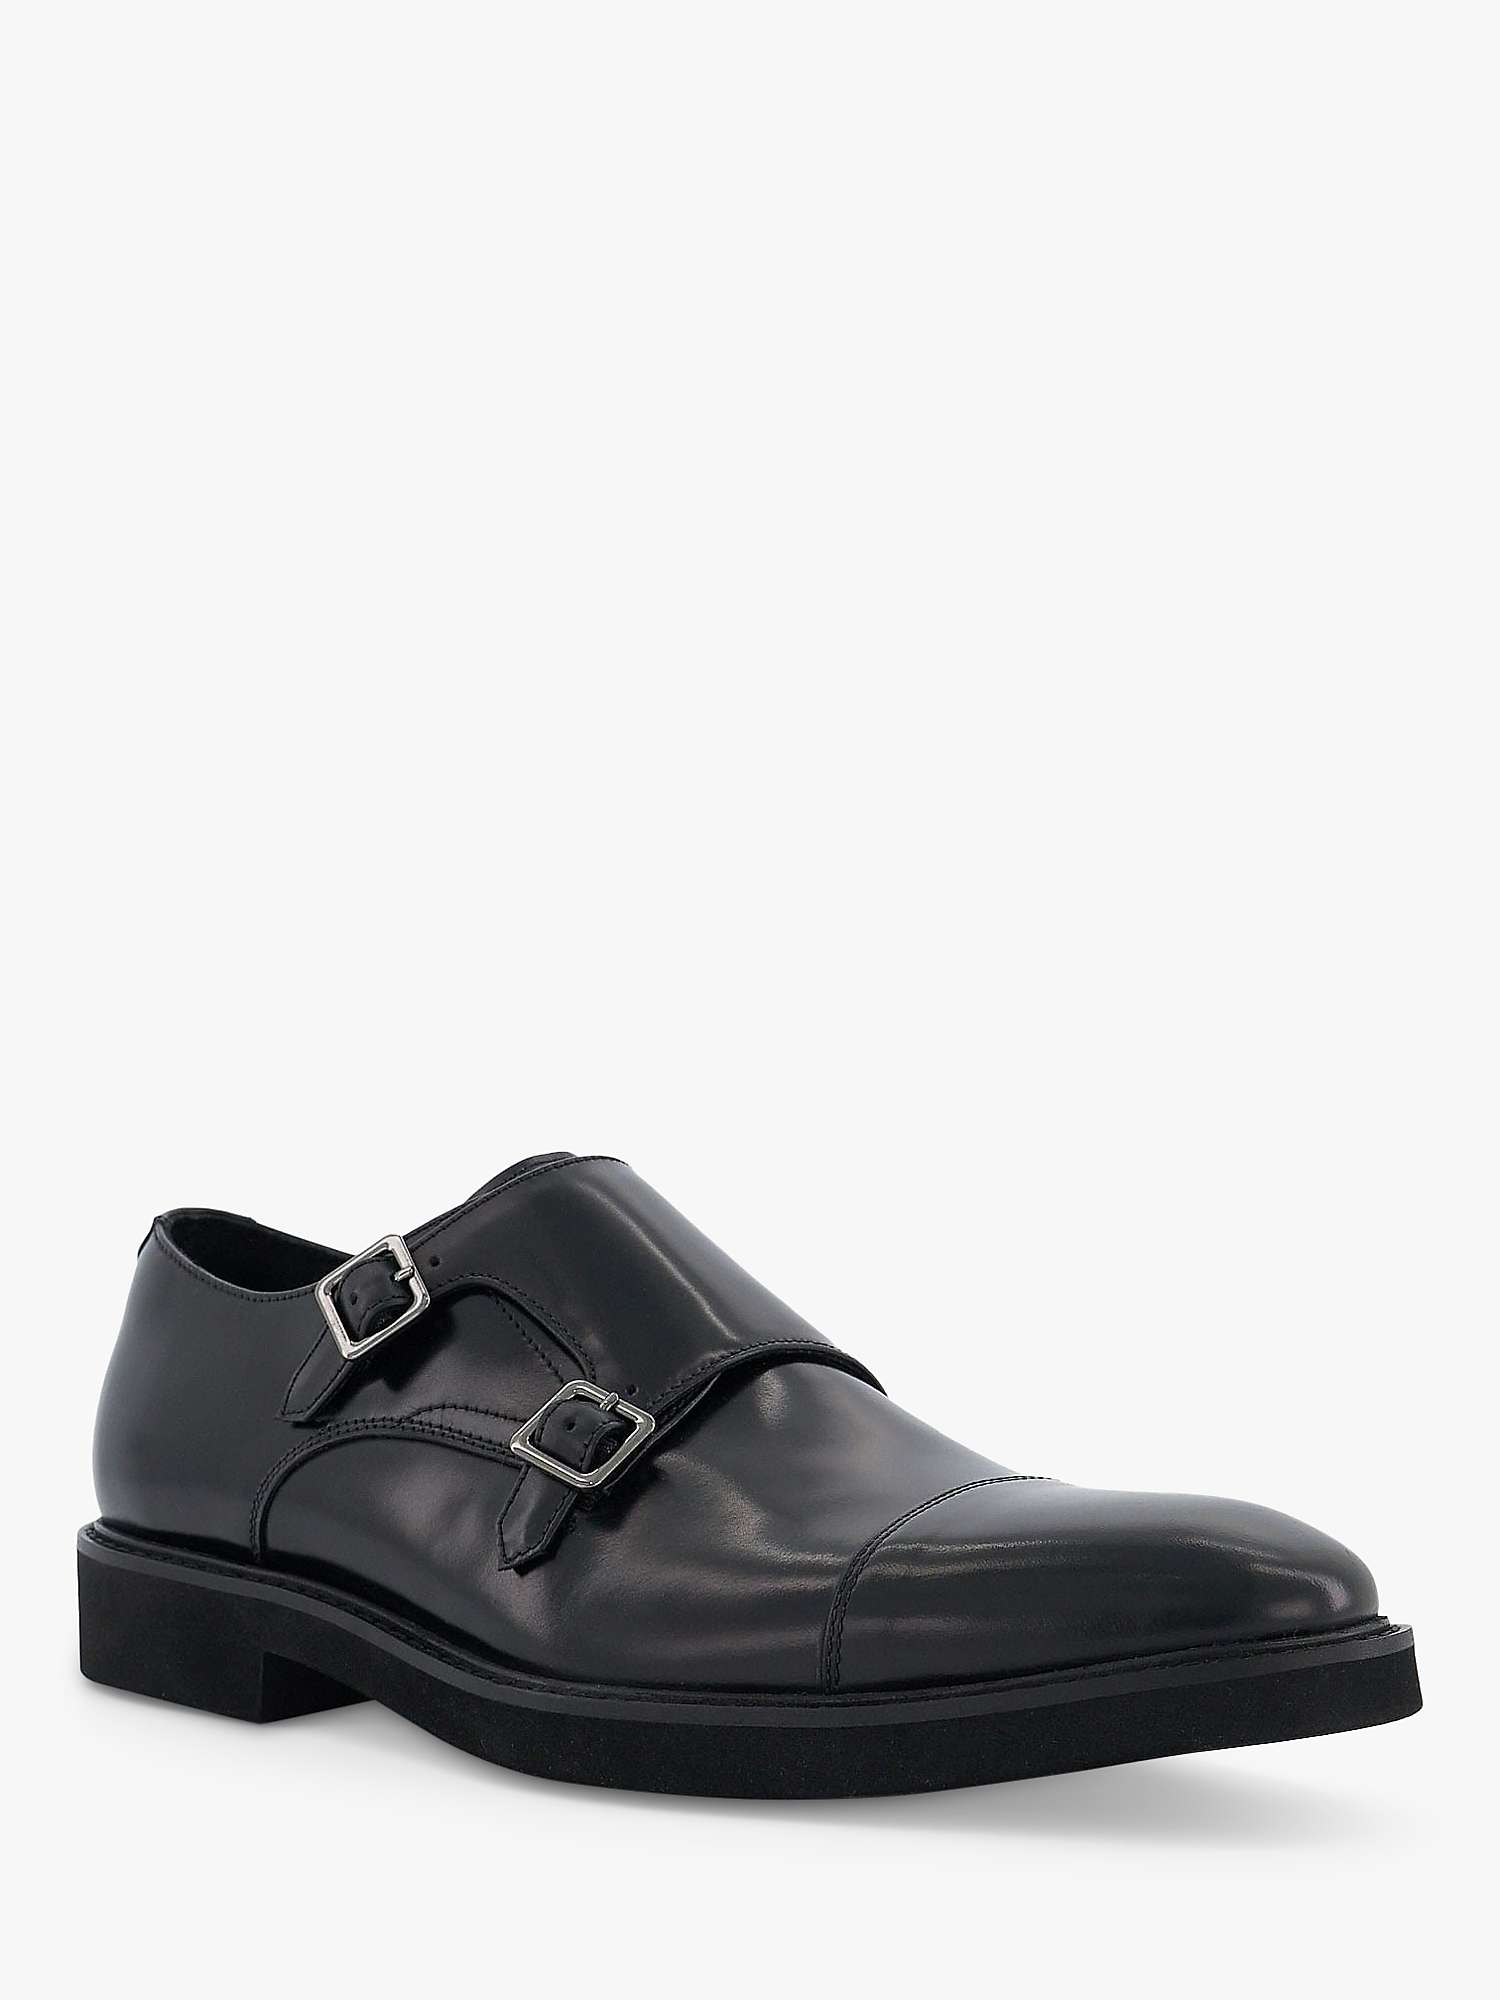 Buy Dune Sal Double Strap Leather Monk Shoes, Black Online at johnlewis.com